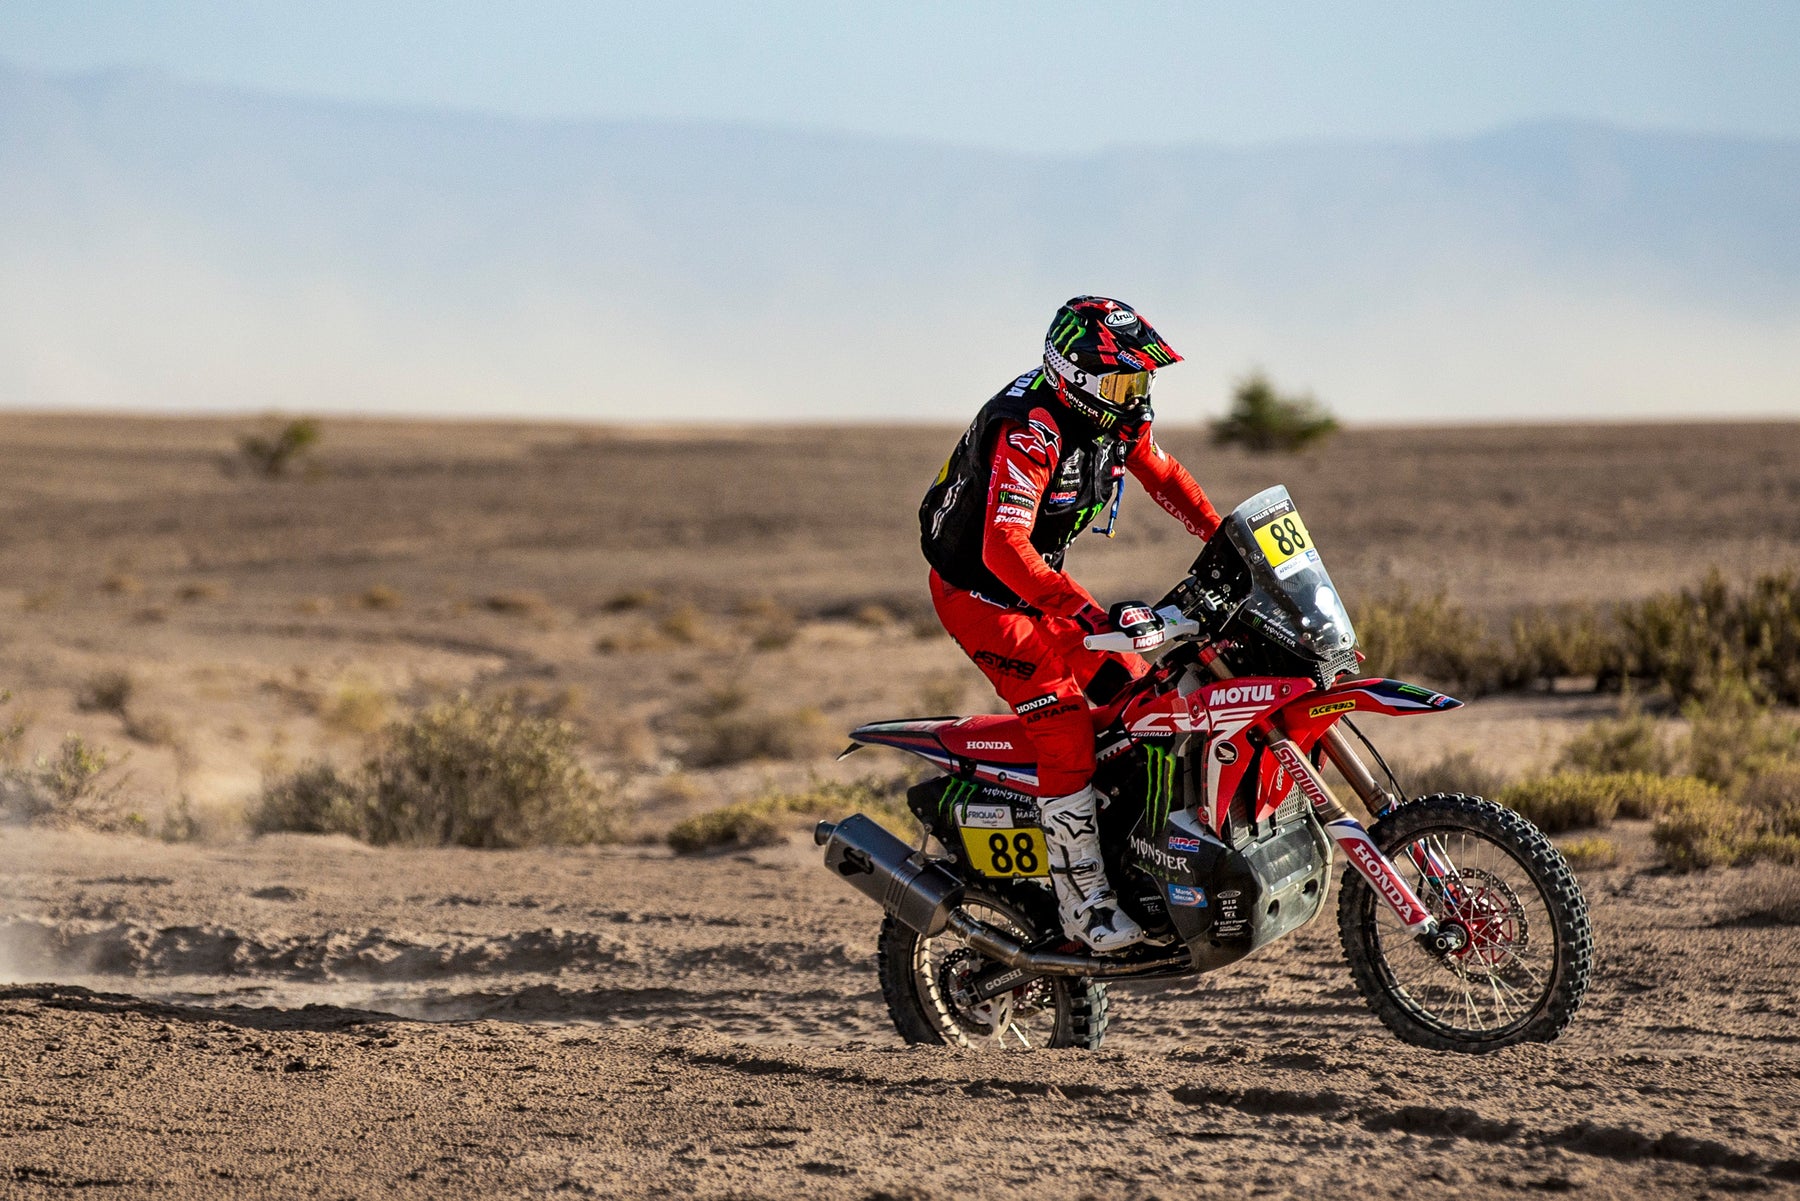 ALPINESTARS PODIUM LOCK-OUT AS JOAN BARREDA IS VICTORIOUS IN STAGE ONE OF RALLYE DU MAROC